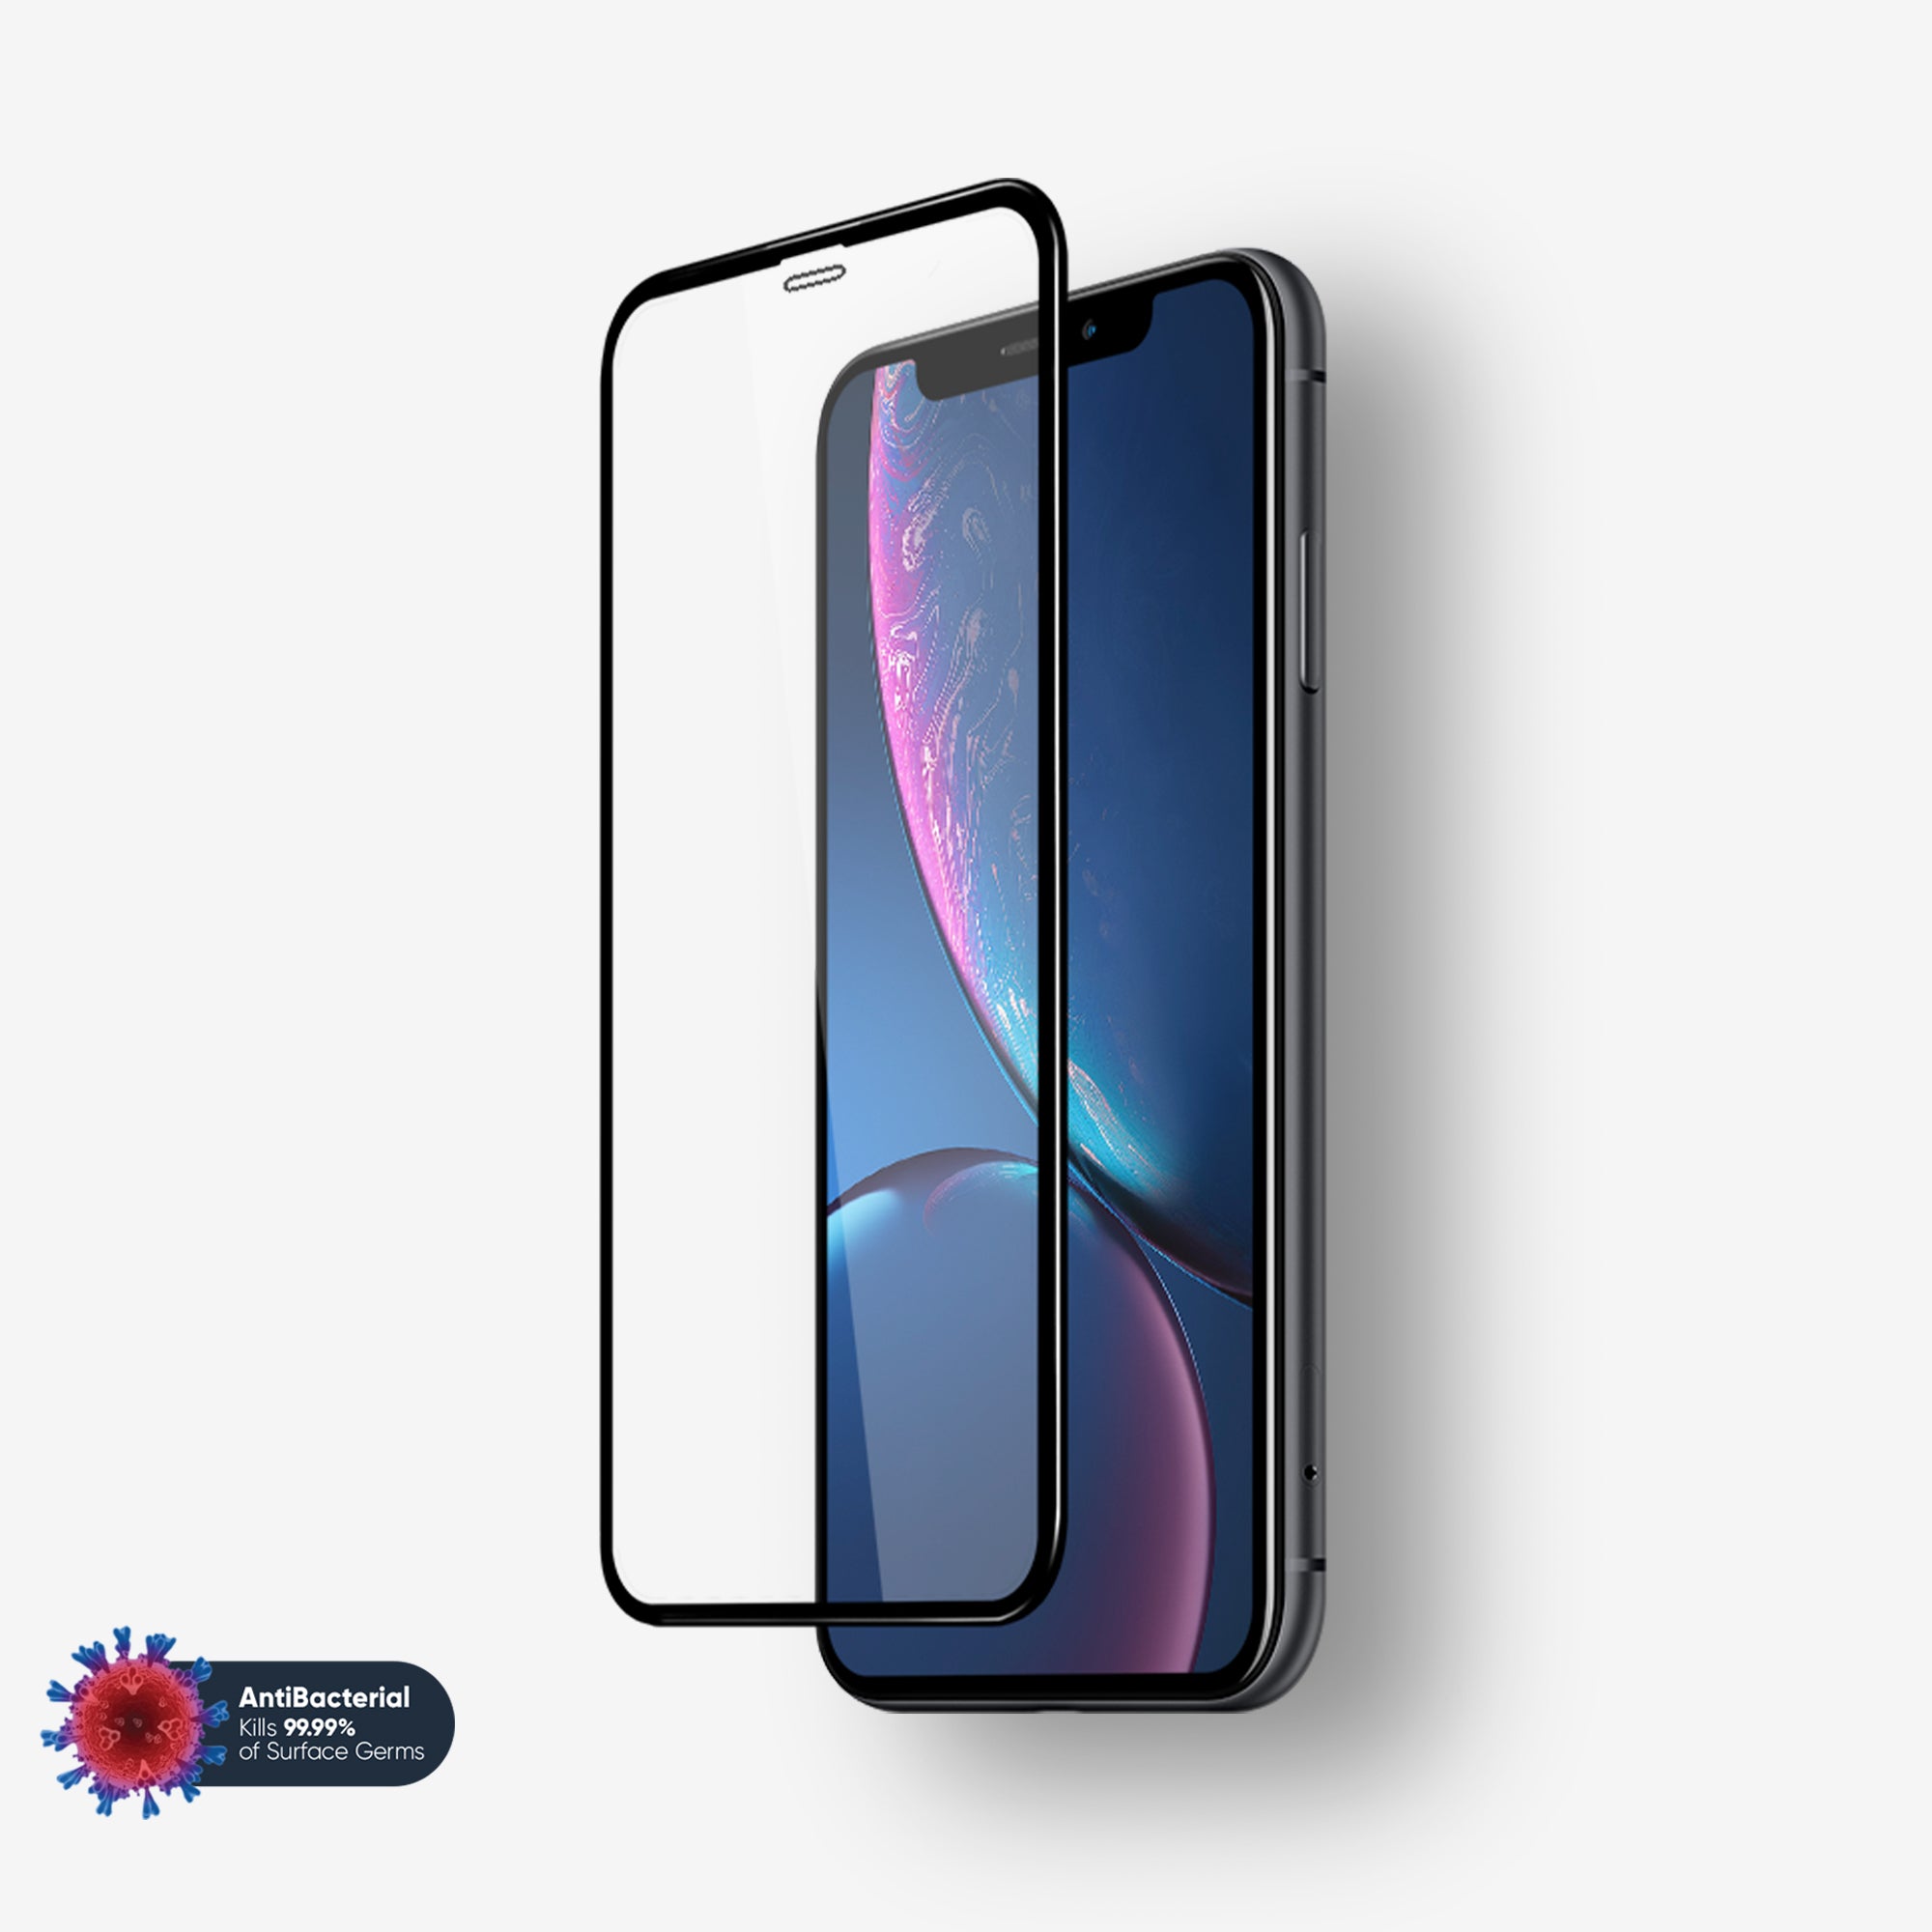 NanoArmour Best Screen Protector for iPhone XR Antimicrobial Edge-to-Edge